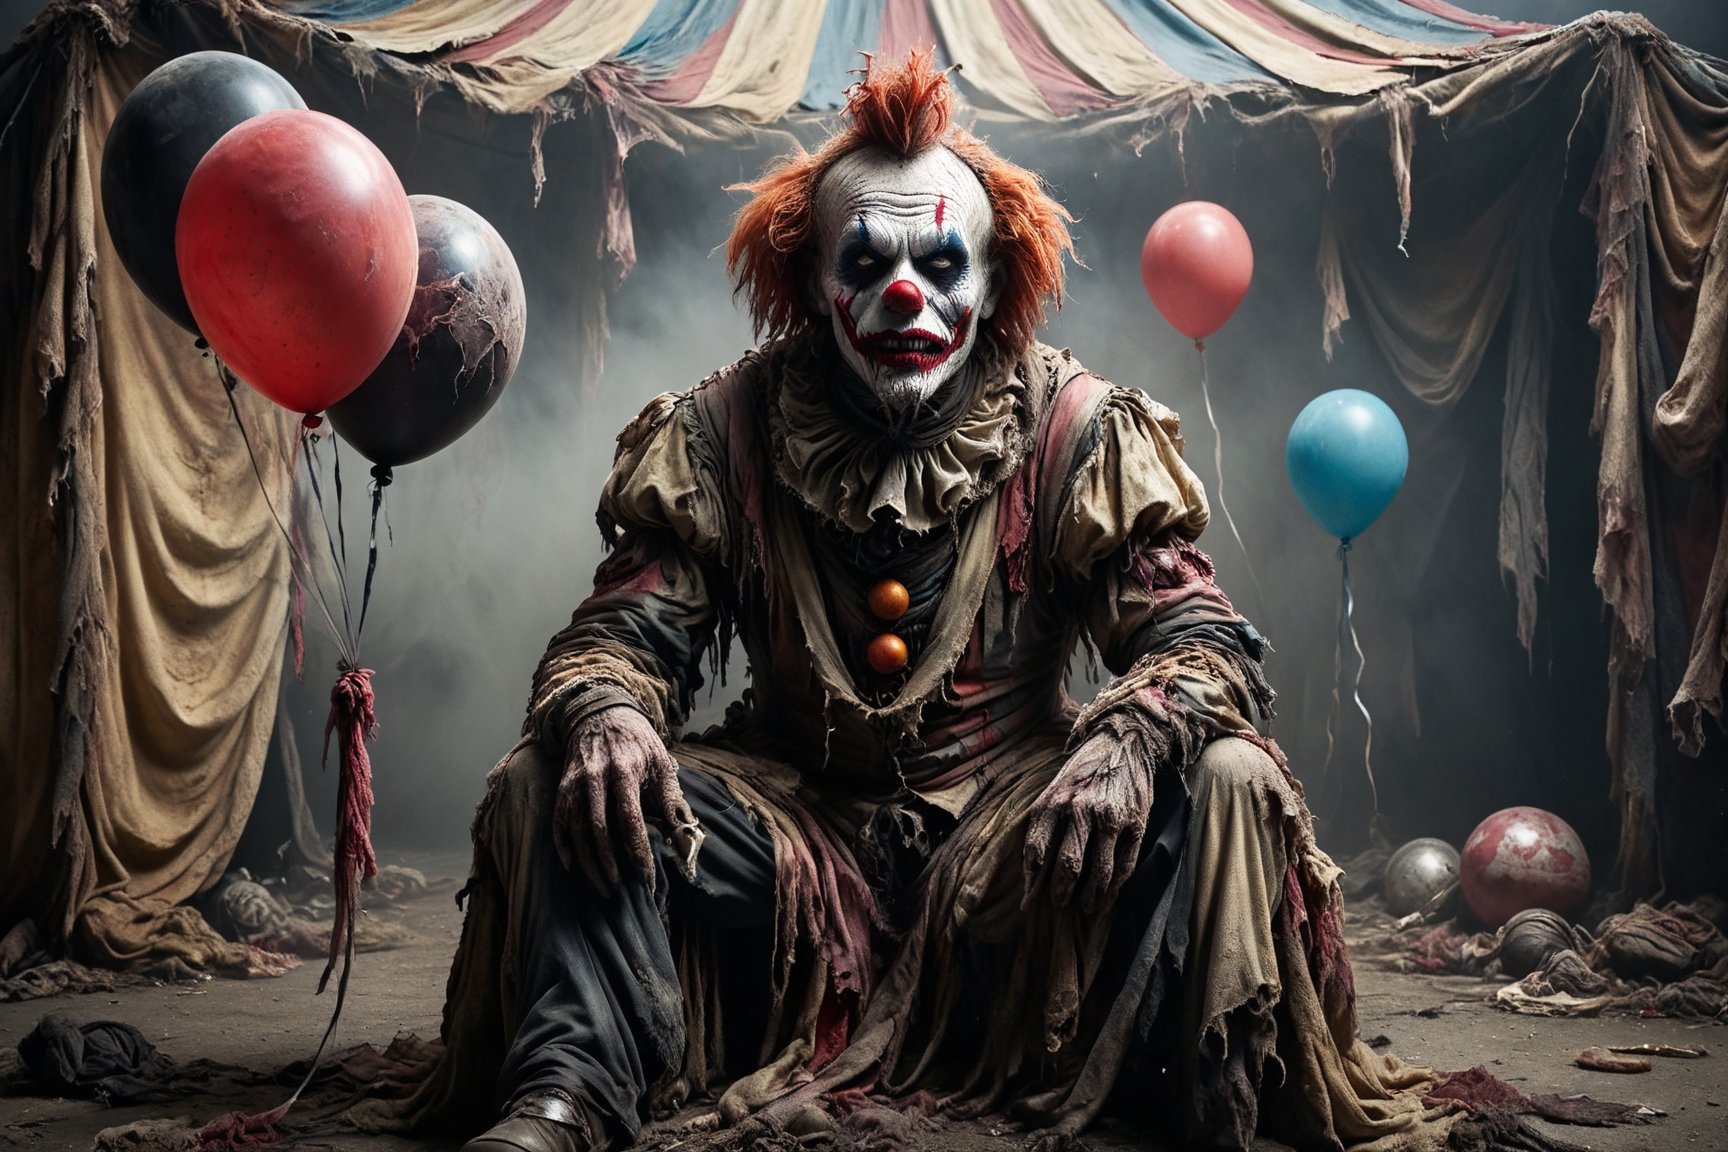 zombie clown sitting in a chair that has two balloons tied to it, putrid skin, disfigured features, torn, dirty and bloody clothes, clown suit, clown hat, bored waiting for someone to come to his performance, circus atmosphere, spooky atmosphere and atmosphere of terror, old dilapidated circus tent in background, 16k UHD, extreme realism, maximum definitions, ultra detail,monster,steampunk style,more detail XL